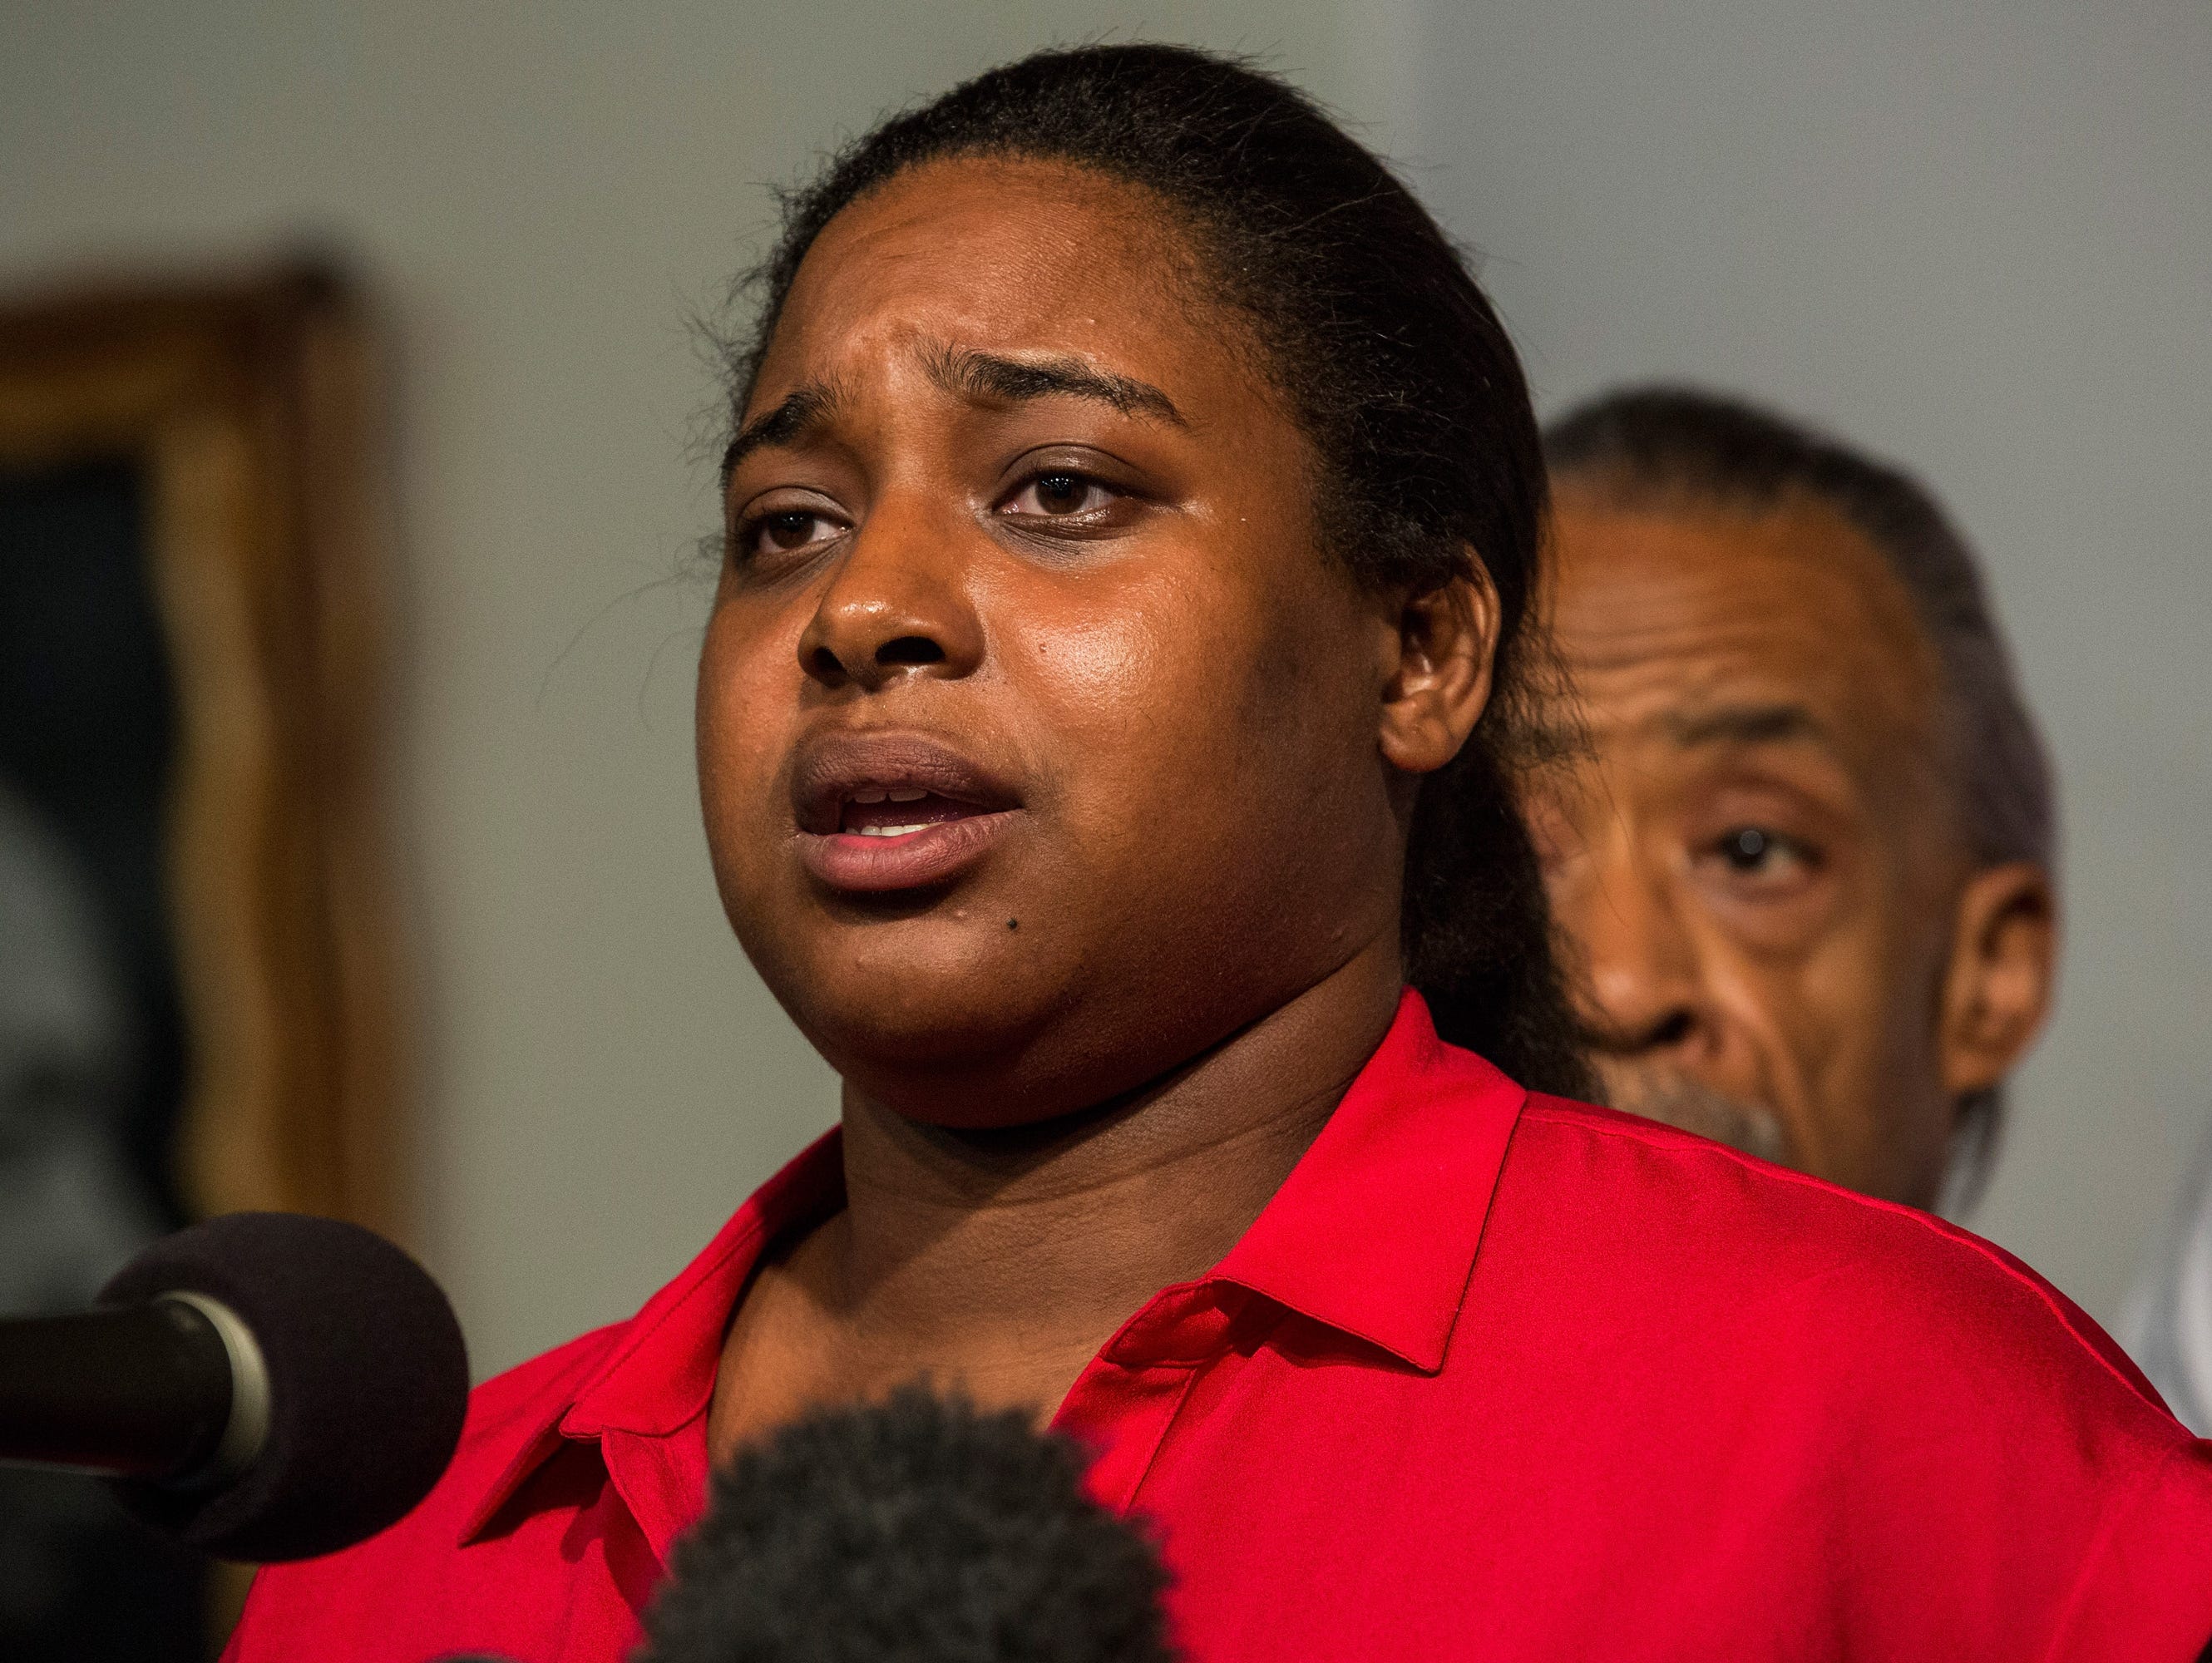 Erica Garner, 27, shownina file photo, ws hospitalized on Christmas Eve following a heart attack. The activist became an critic of police brutality following the death of her father, Eric Garner, in 2014, as he was being arrested on Staten Island on 